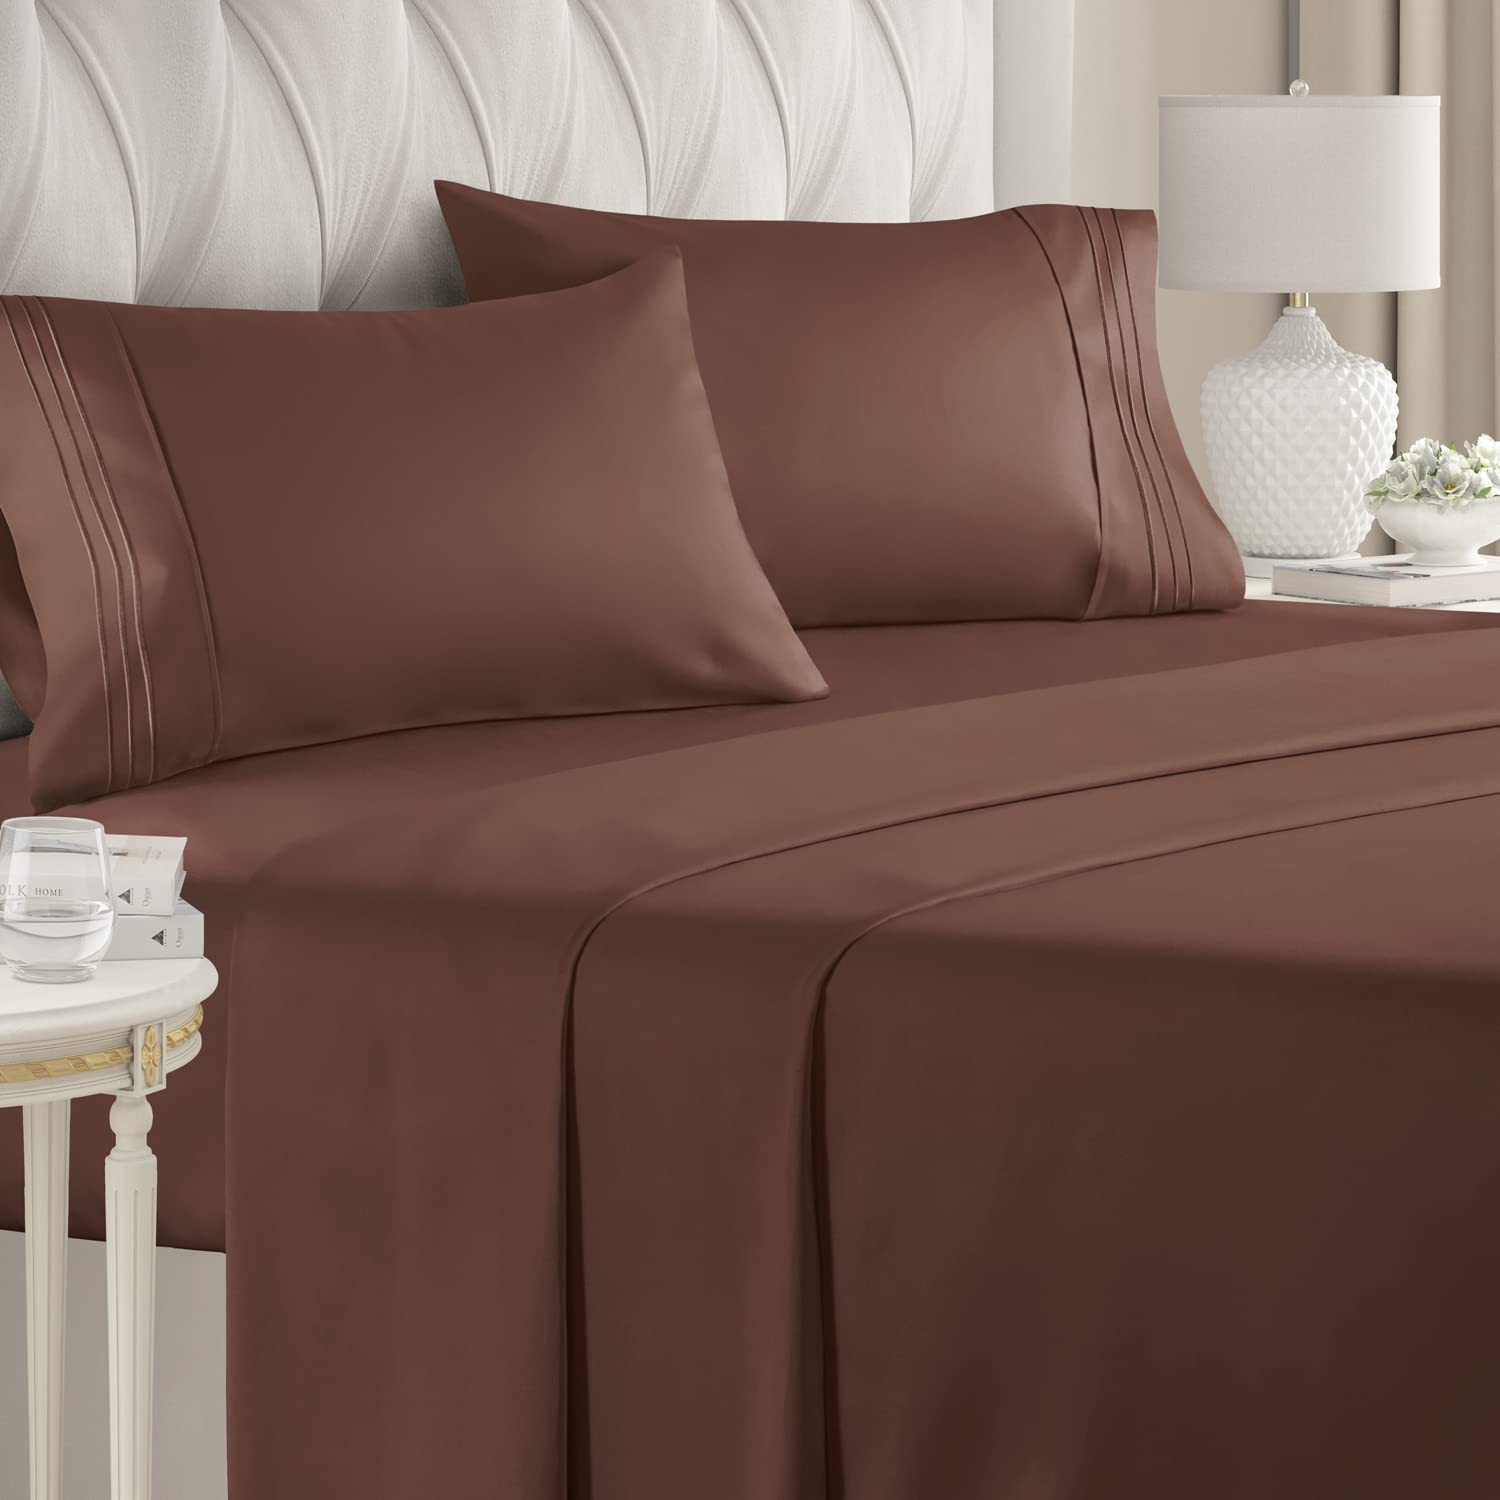 4 Piece Bed Sheet Set 100% Egyptian Cotton 1000-TC 40 inch Deep Pocket Chocolate Color